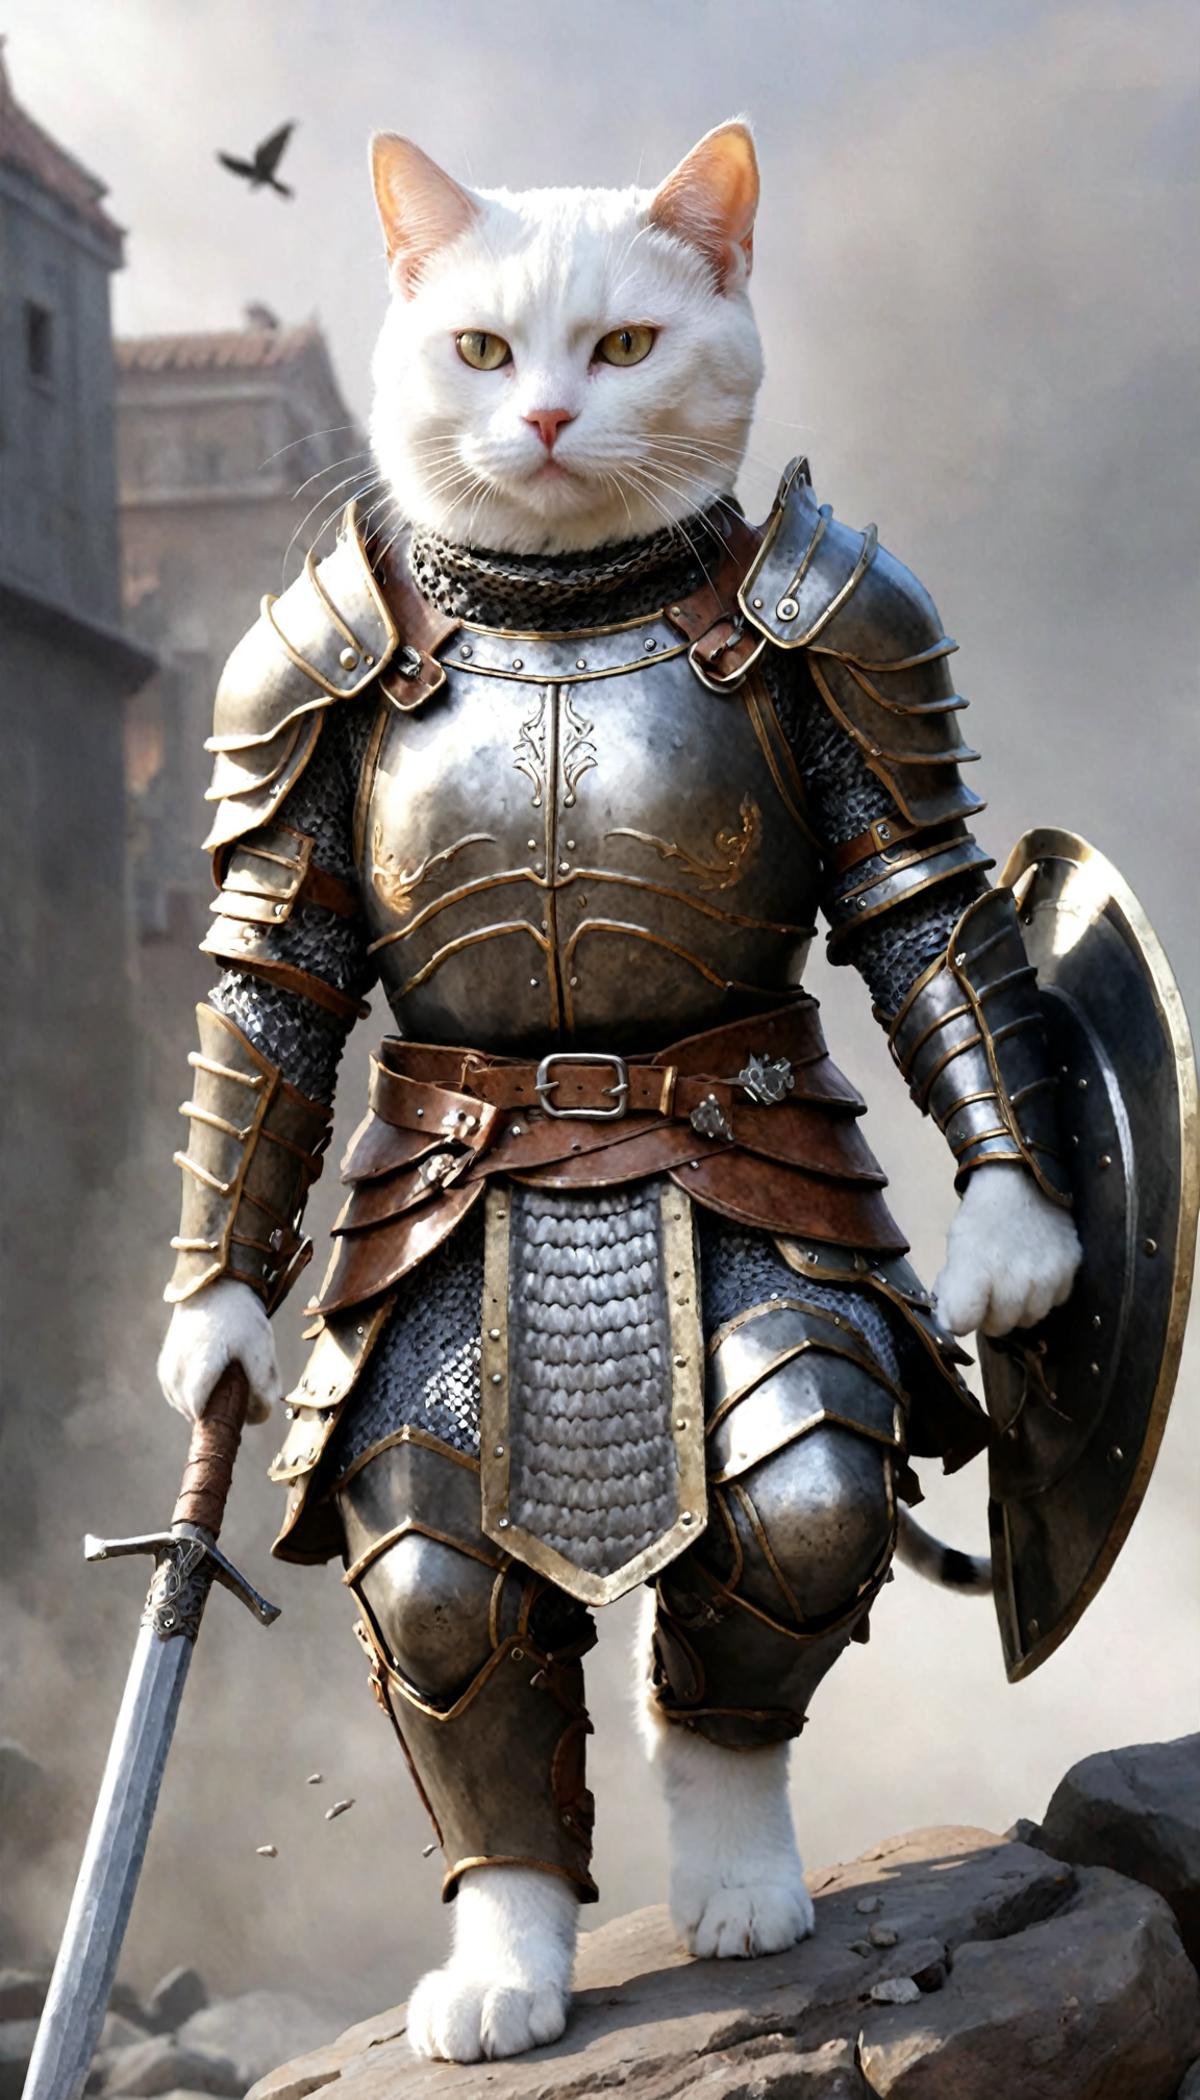 A cat wearing a knight's armor and holding a sword.